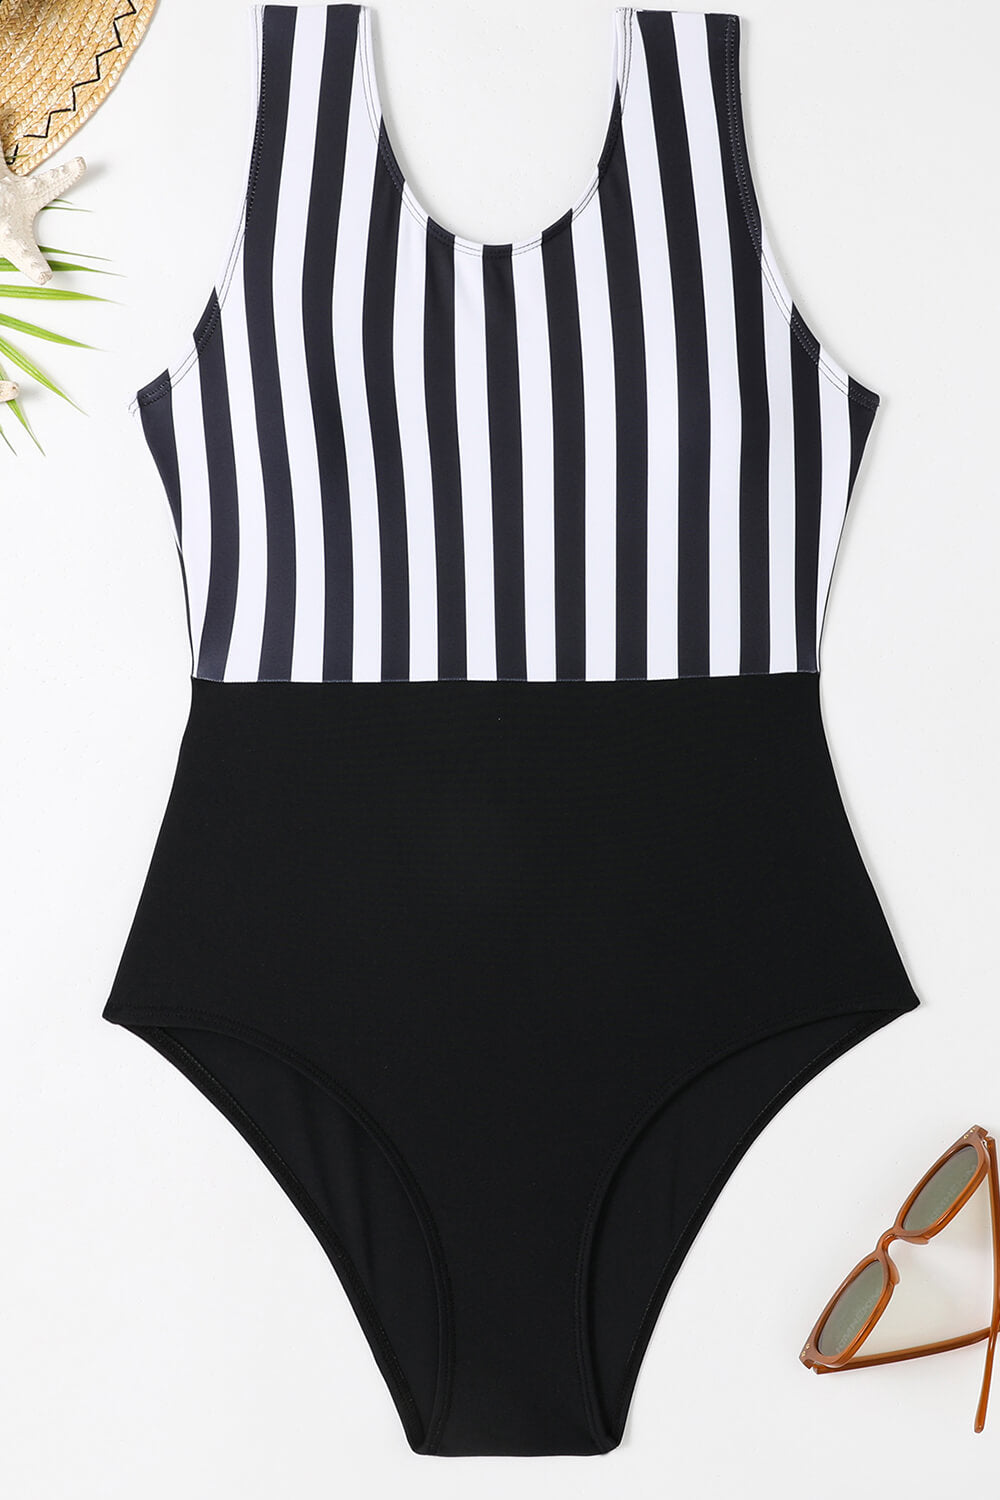 Black And White Striped Color Block One Piece Swimsuit